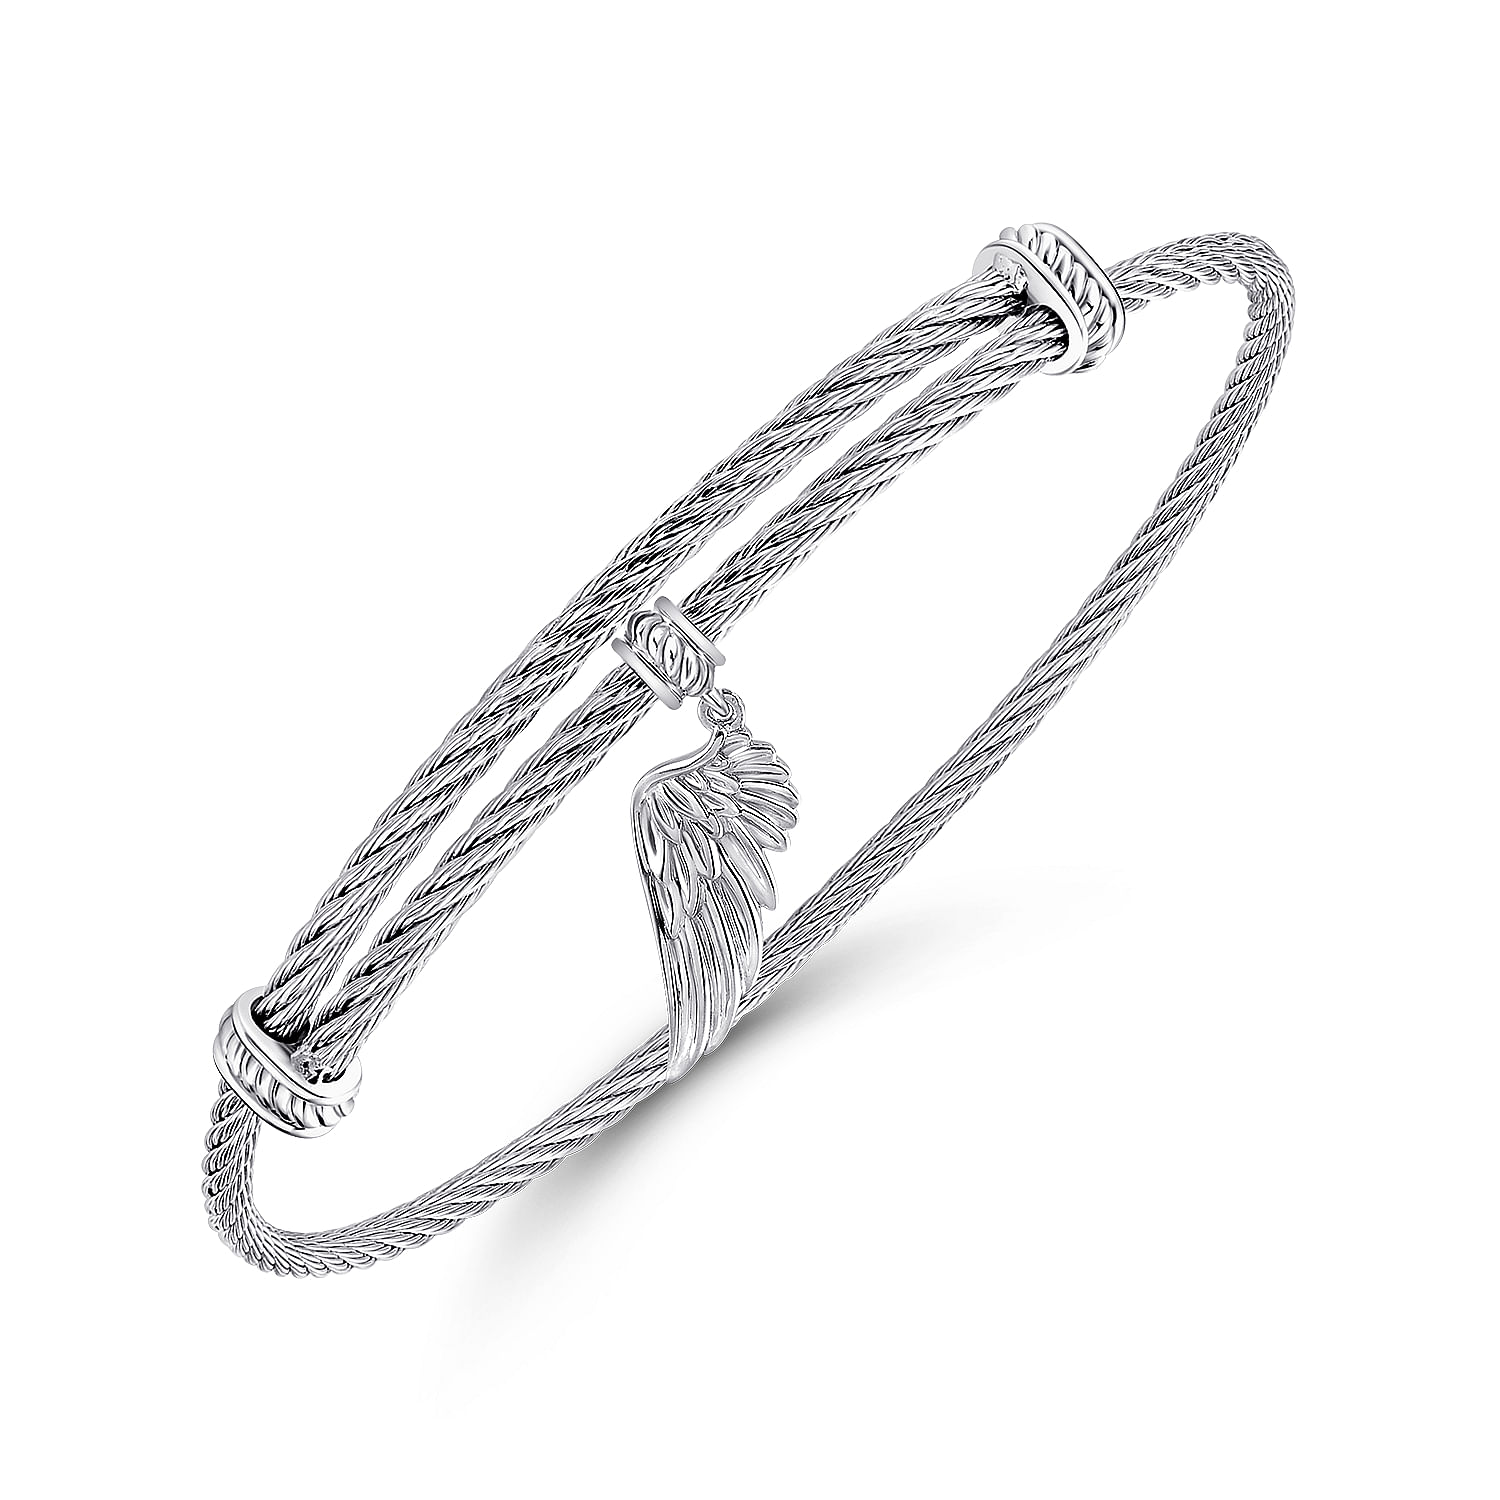 Adjustable Twisted Cable Stainless Steel Bangle with Sterling Silver Angel Wing Charm - Shot 2